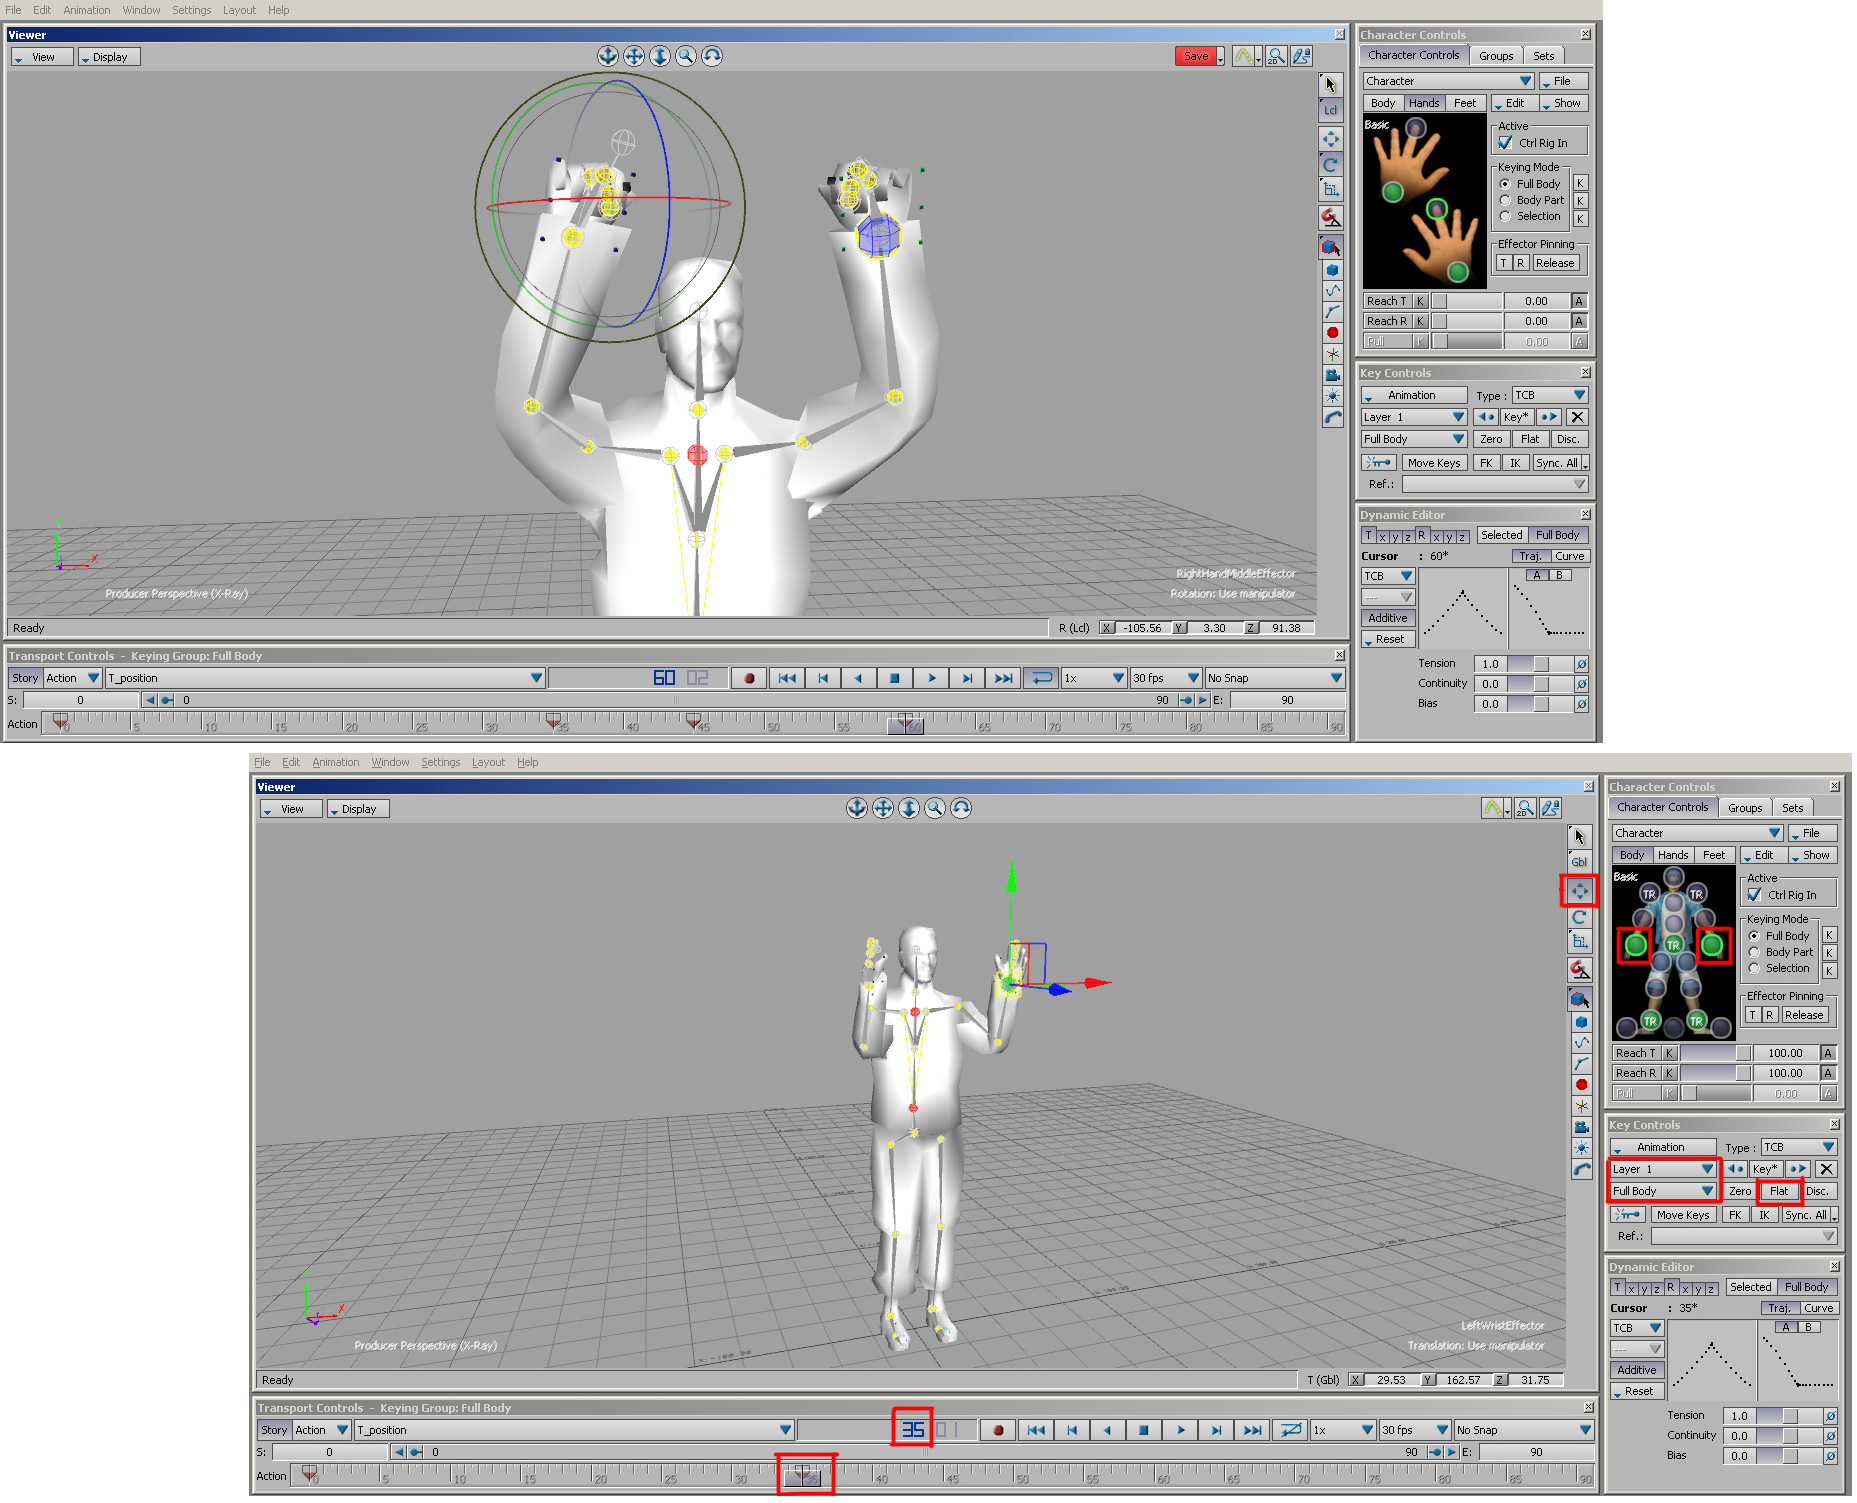 Creating a new character animation in MotionBuilder with MetaVR's control rig.